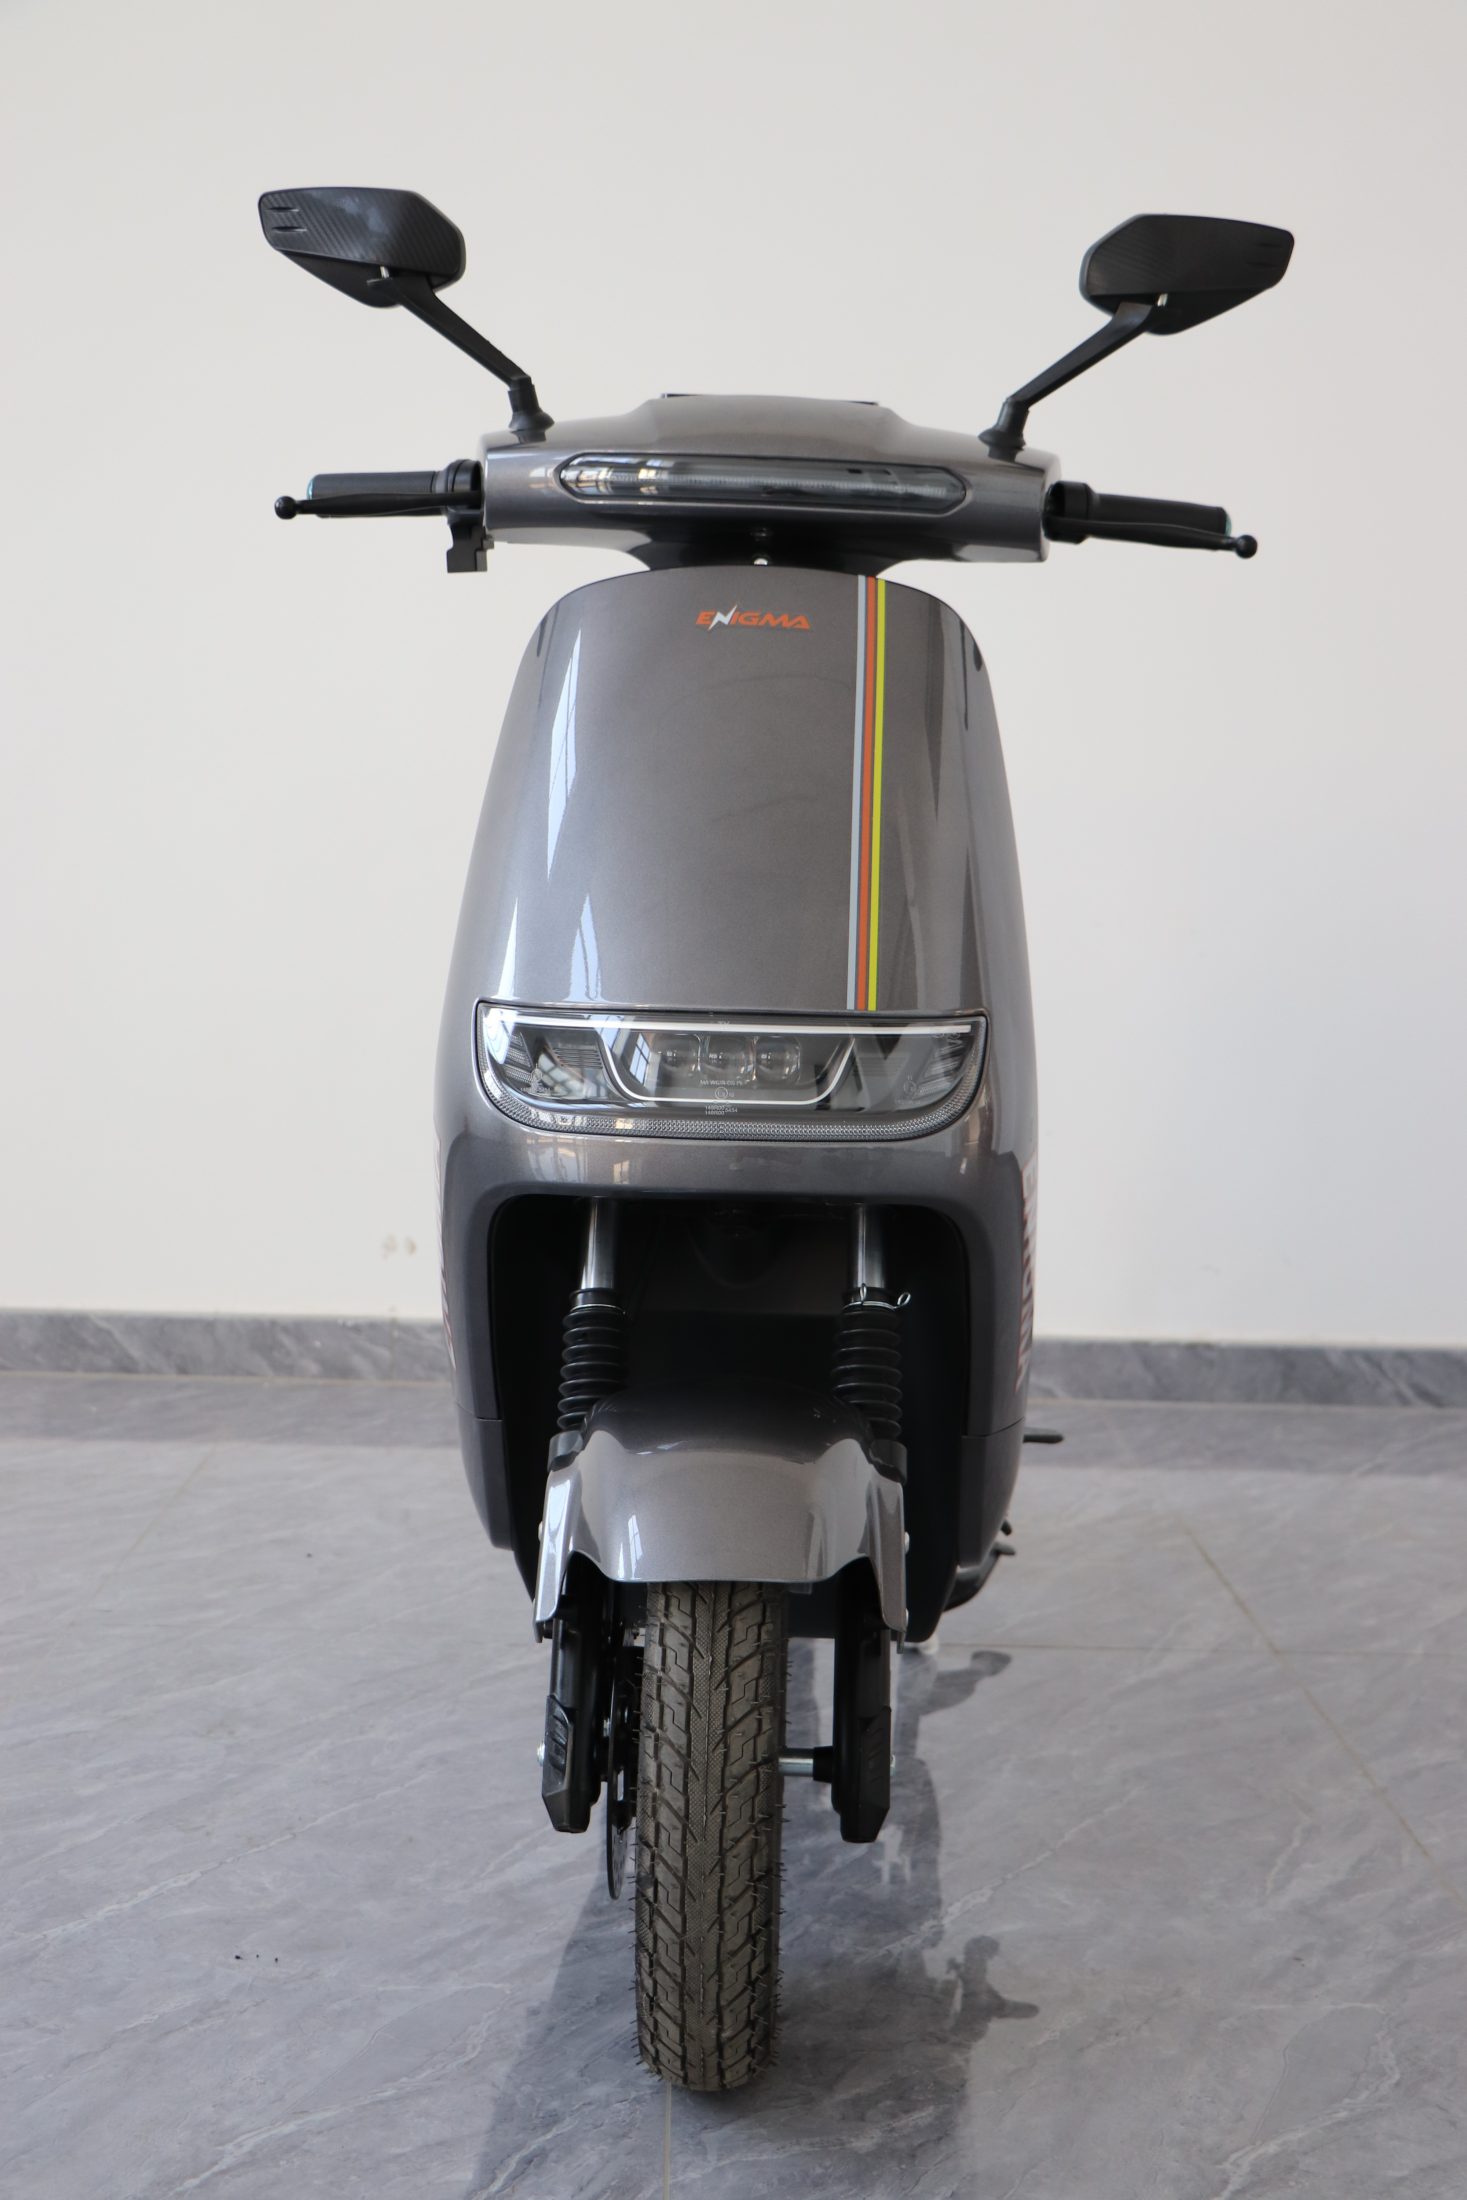 https://e-vehicleinfo.com/enigma-ambier-n8-electric-scooter-launched-200-km-range-price-1-05-lakh/